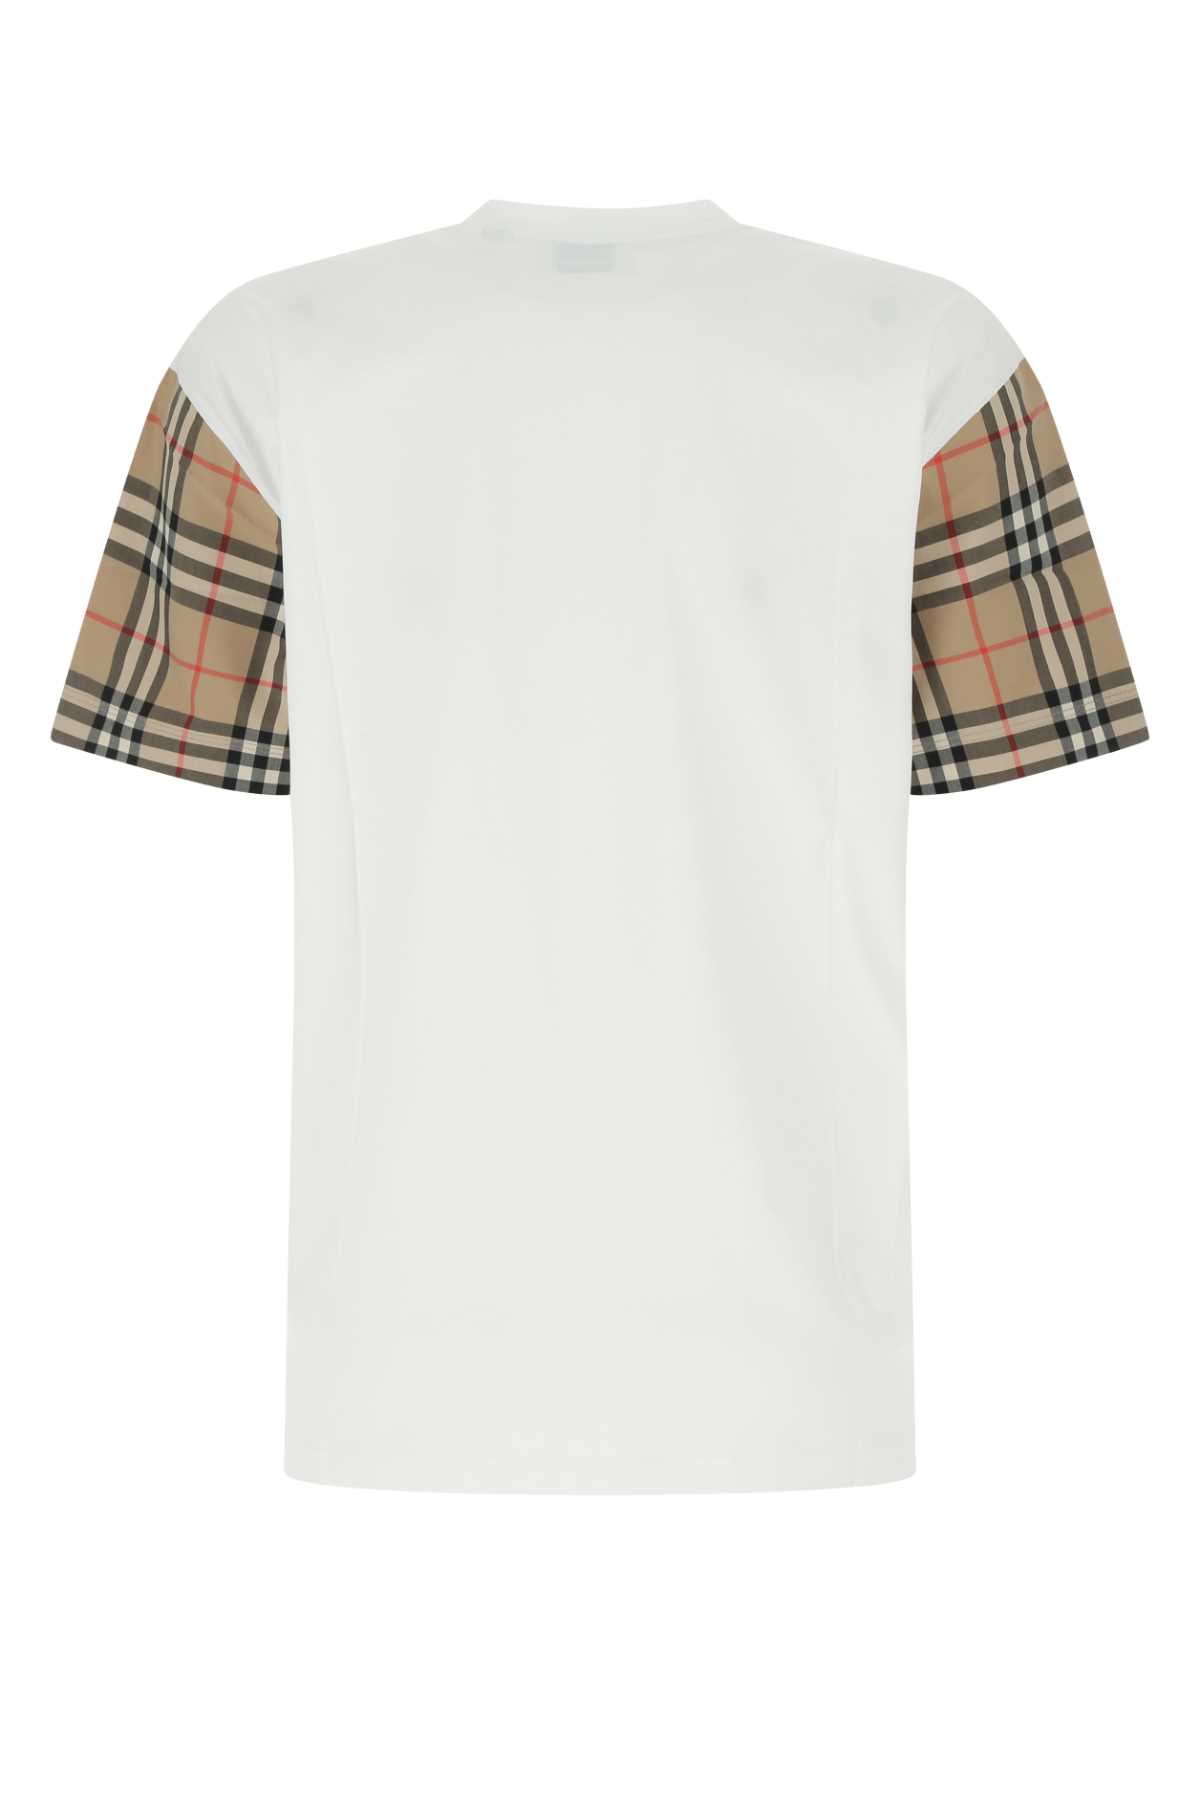 Burberry White Cotton T-shirt In A1464